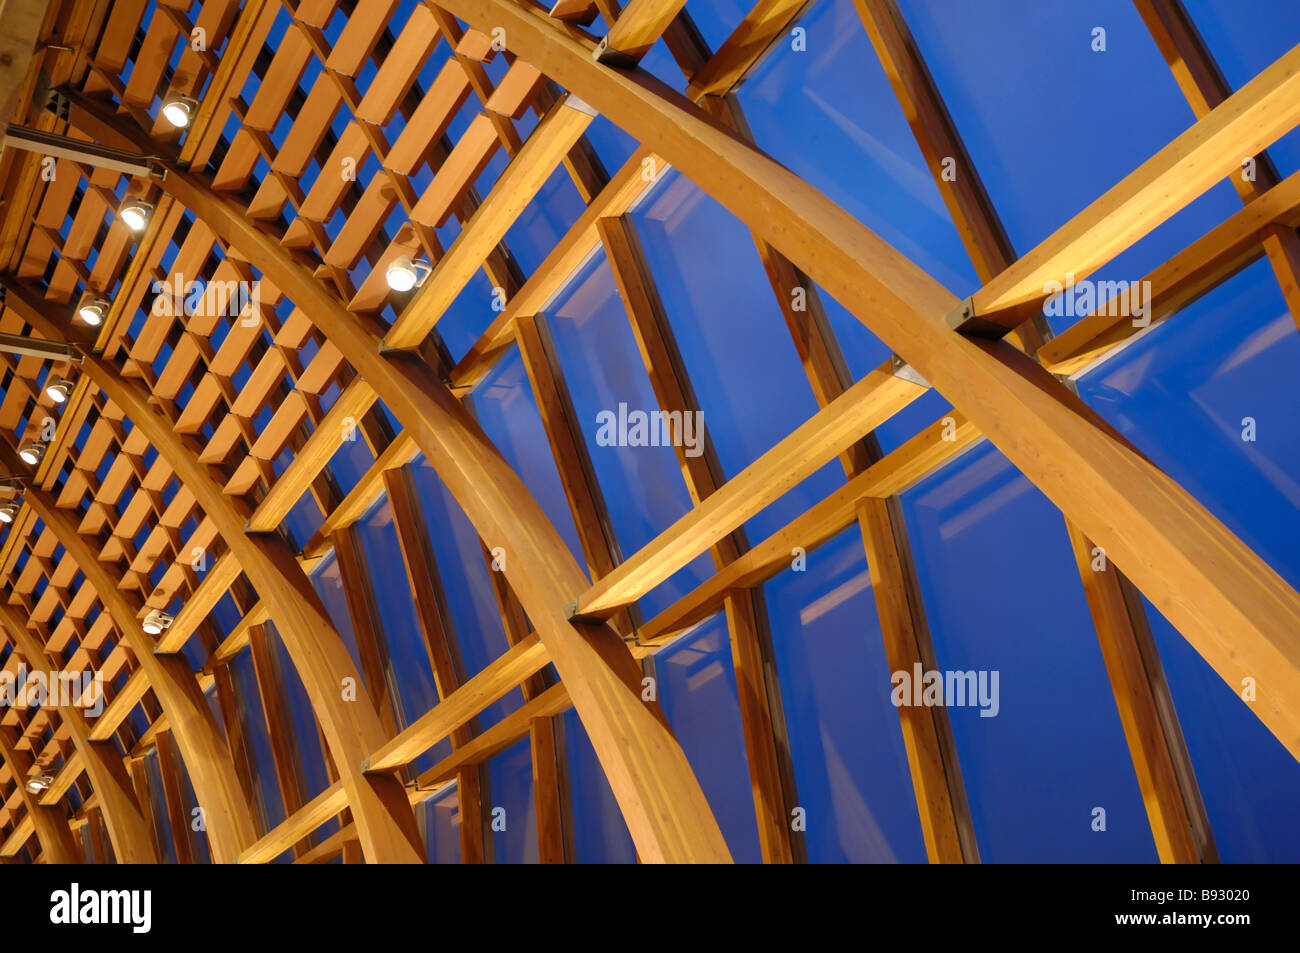 Wooden construction Stock Photo